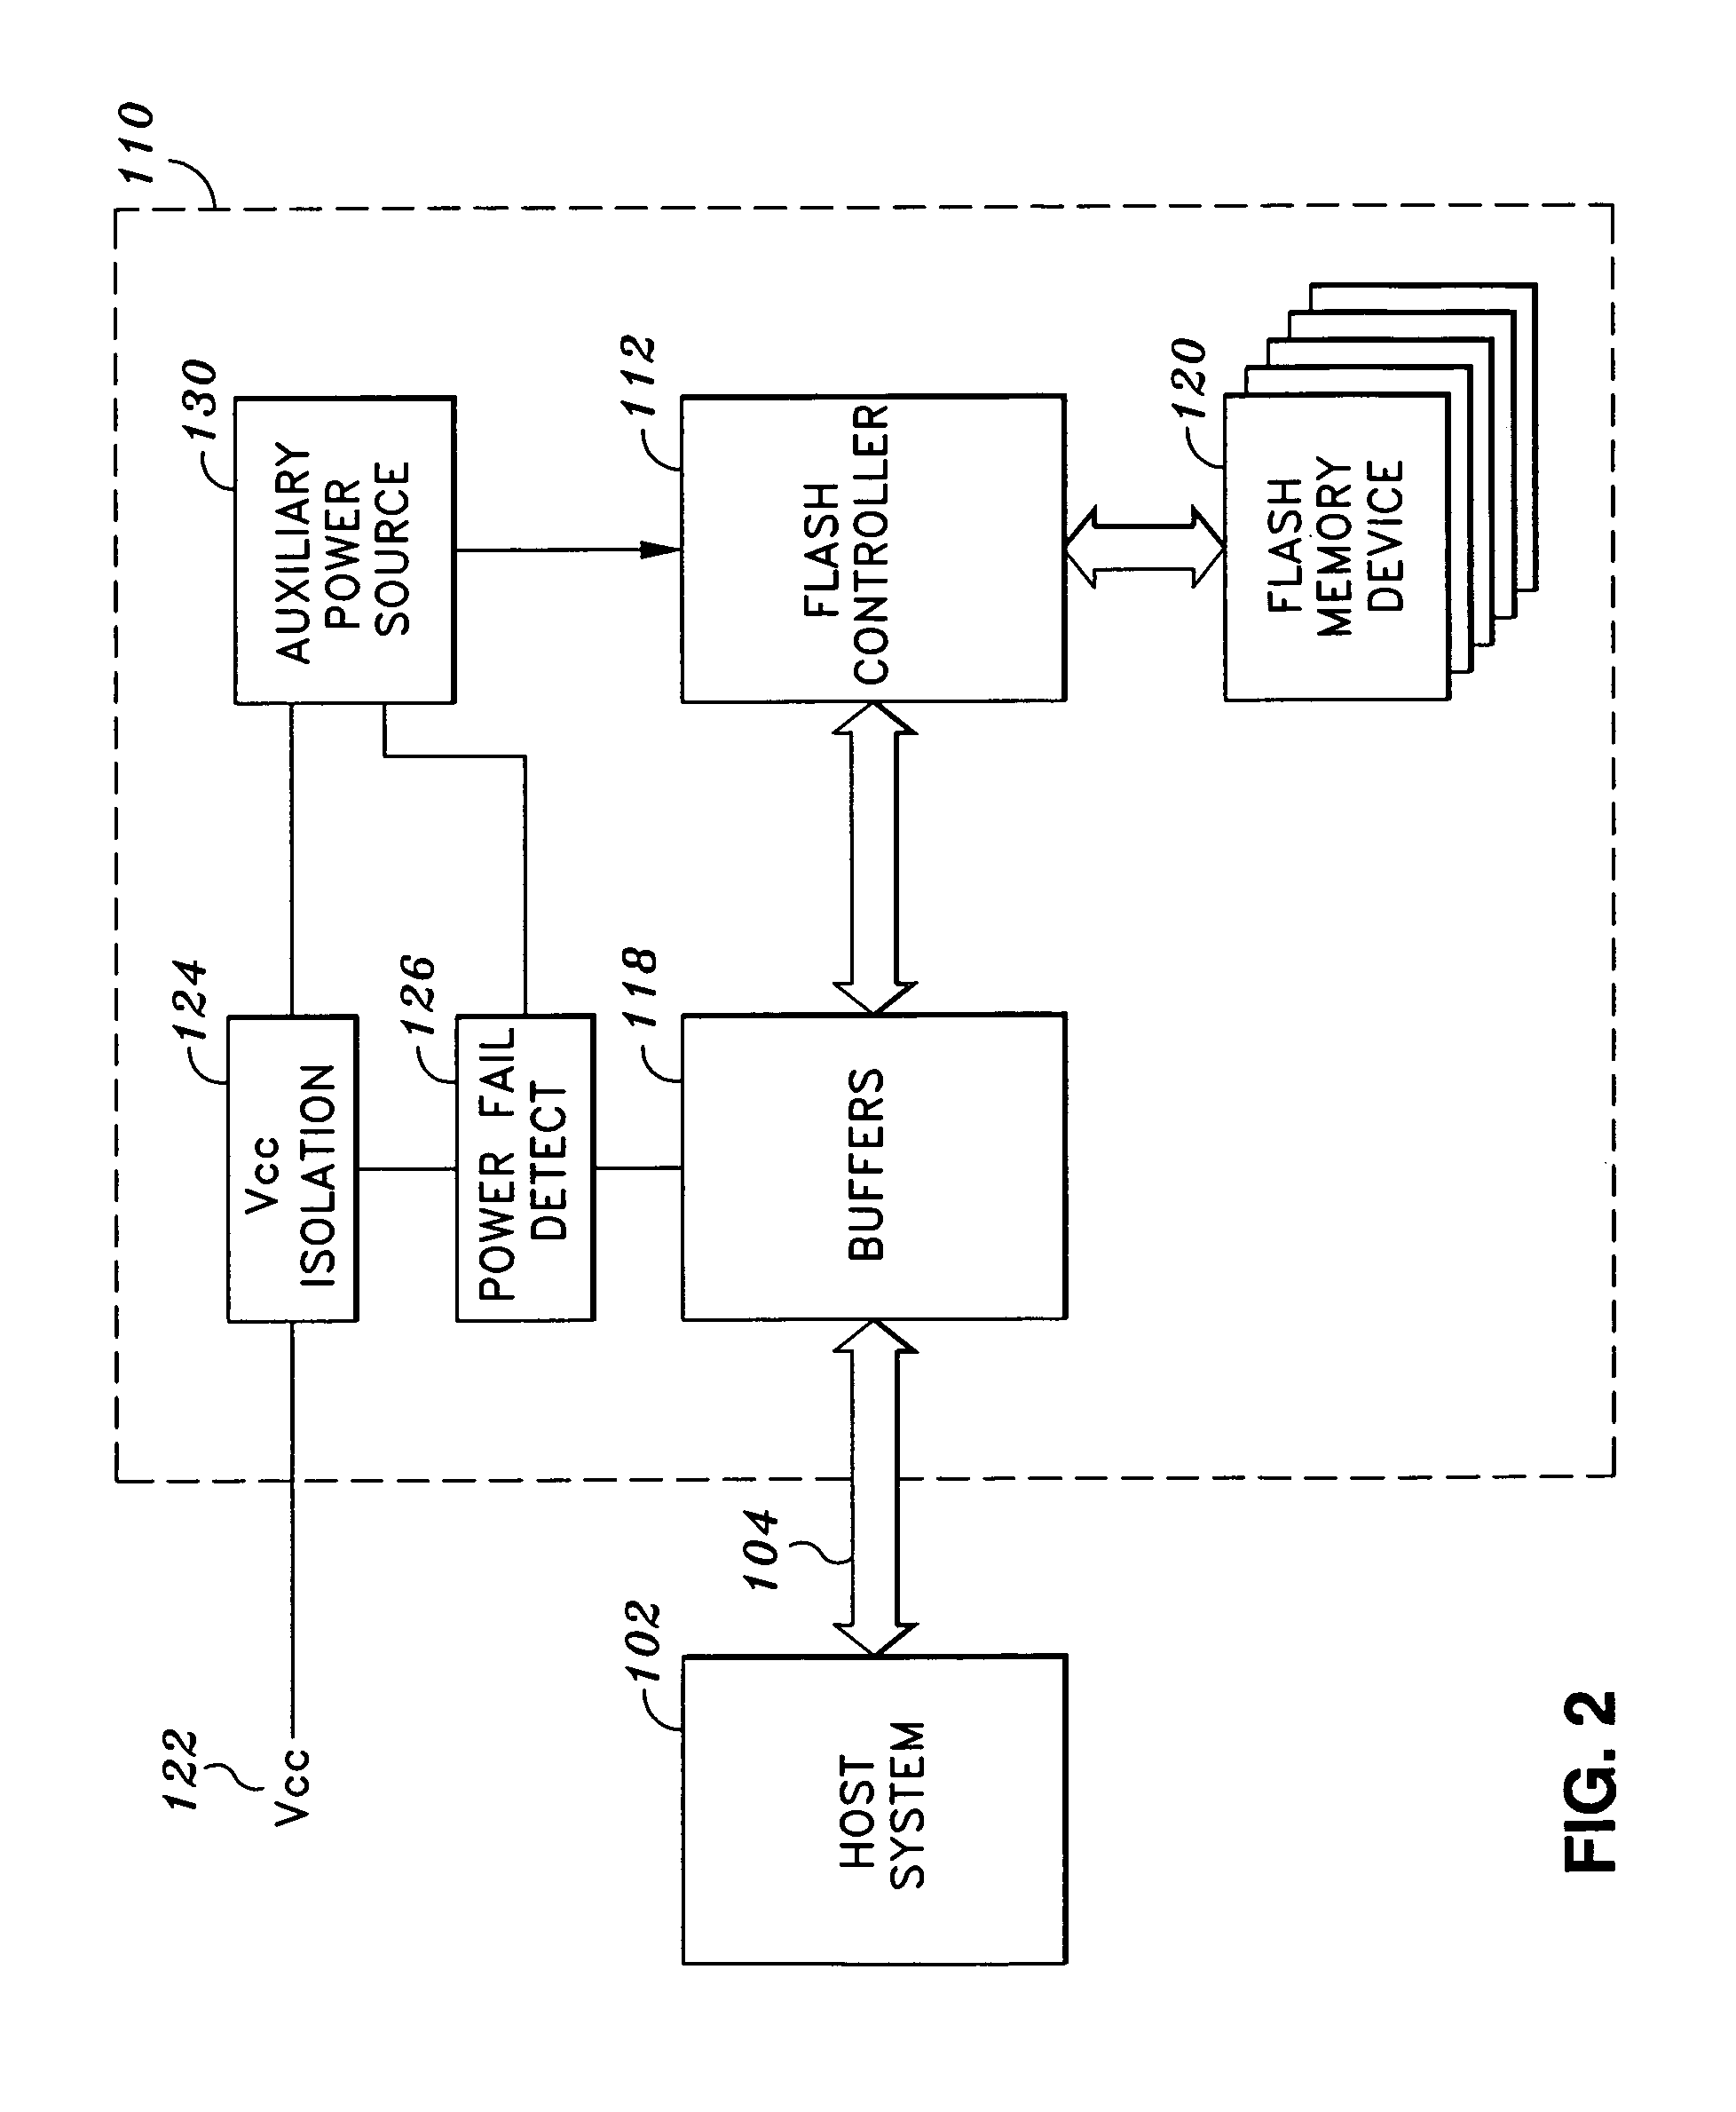 System and method for preventing data corruption in solid-state memory devices after a power failure